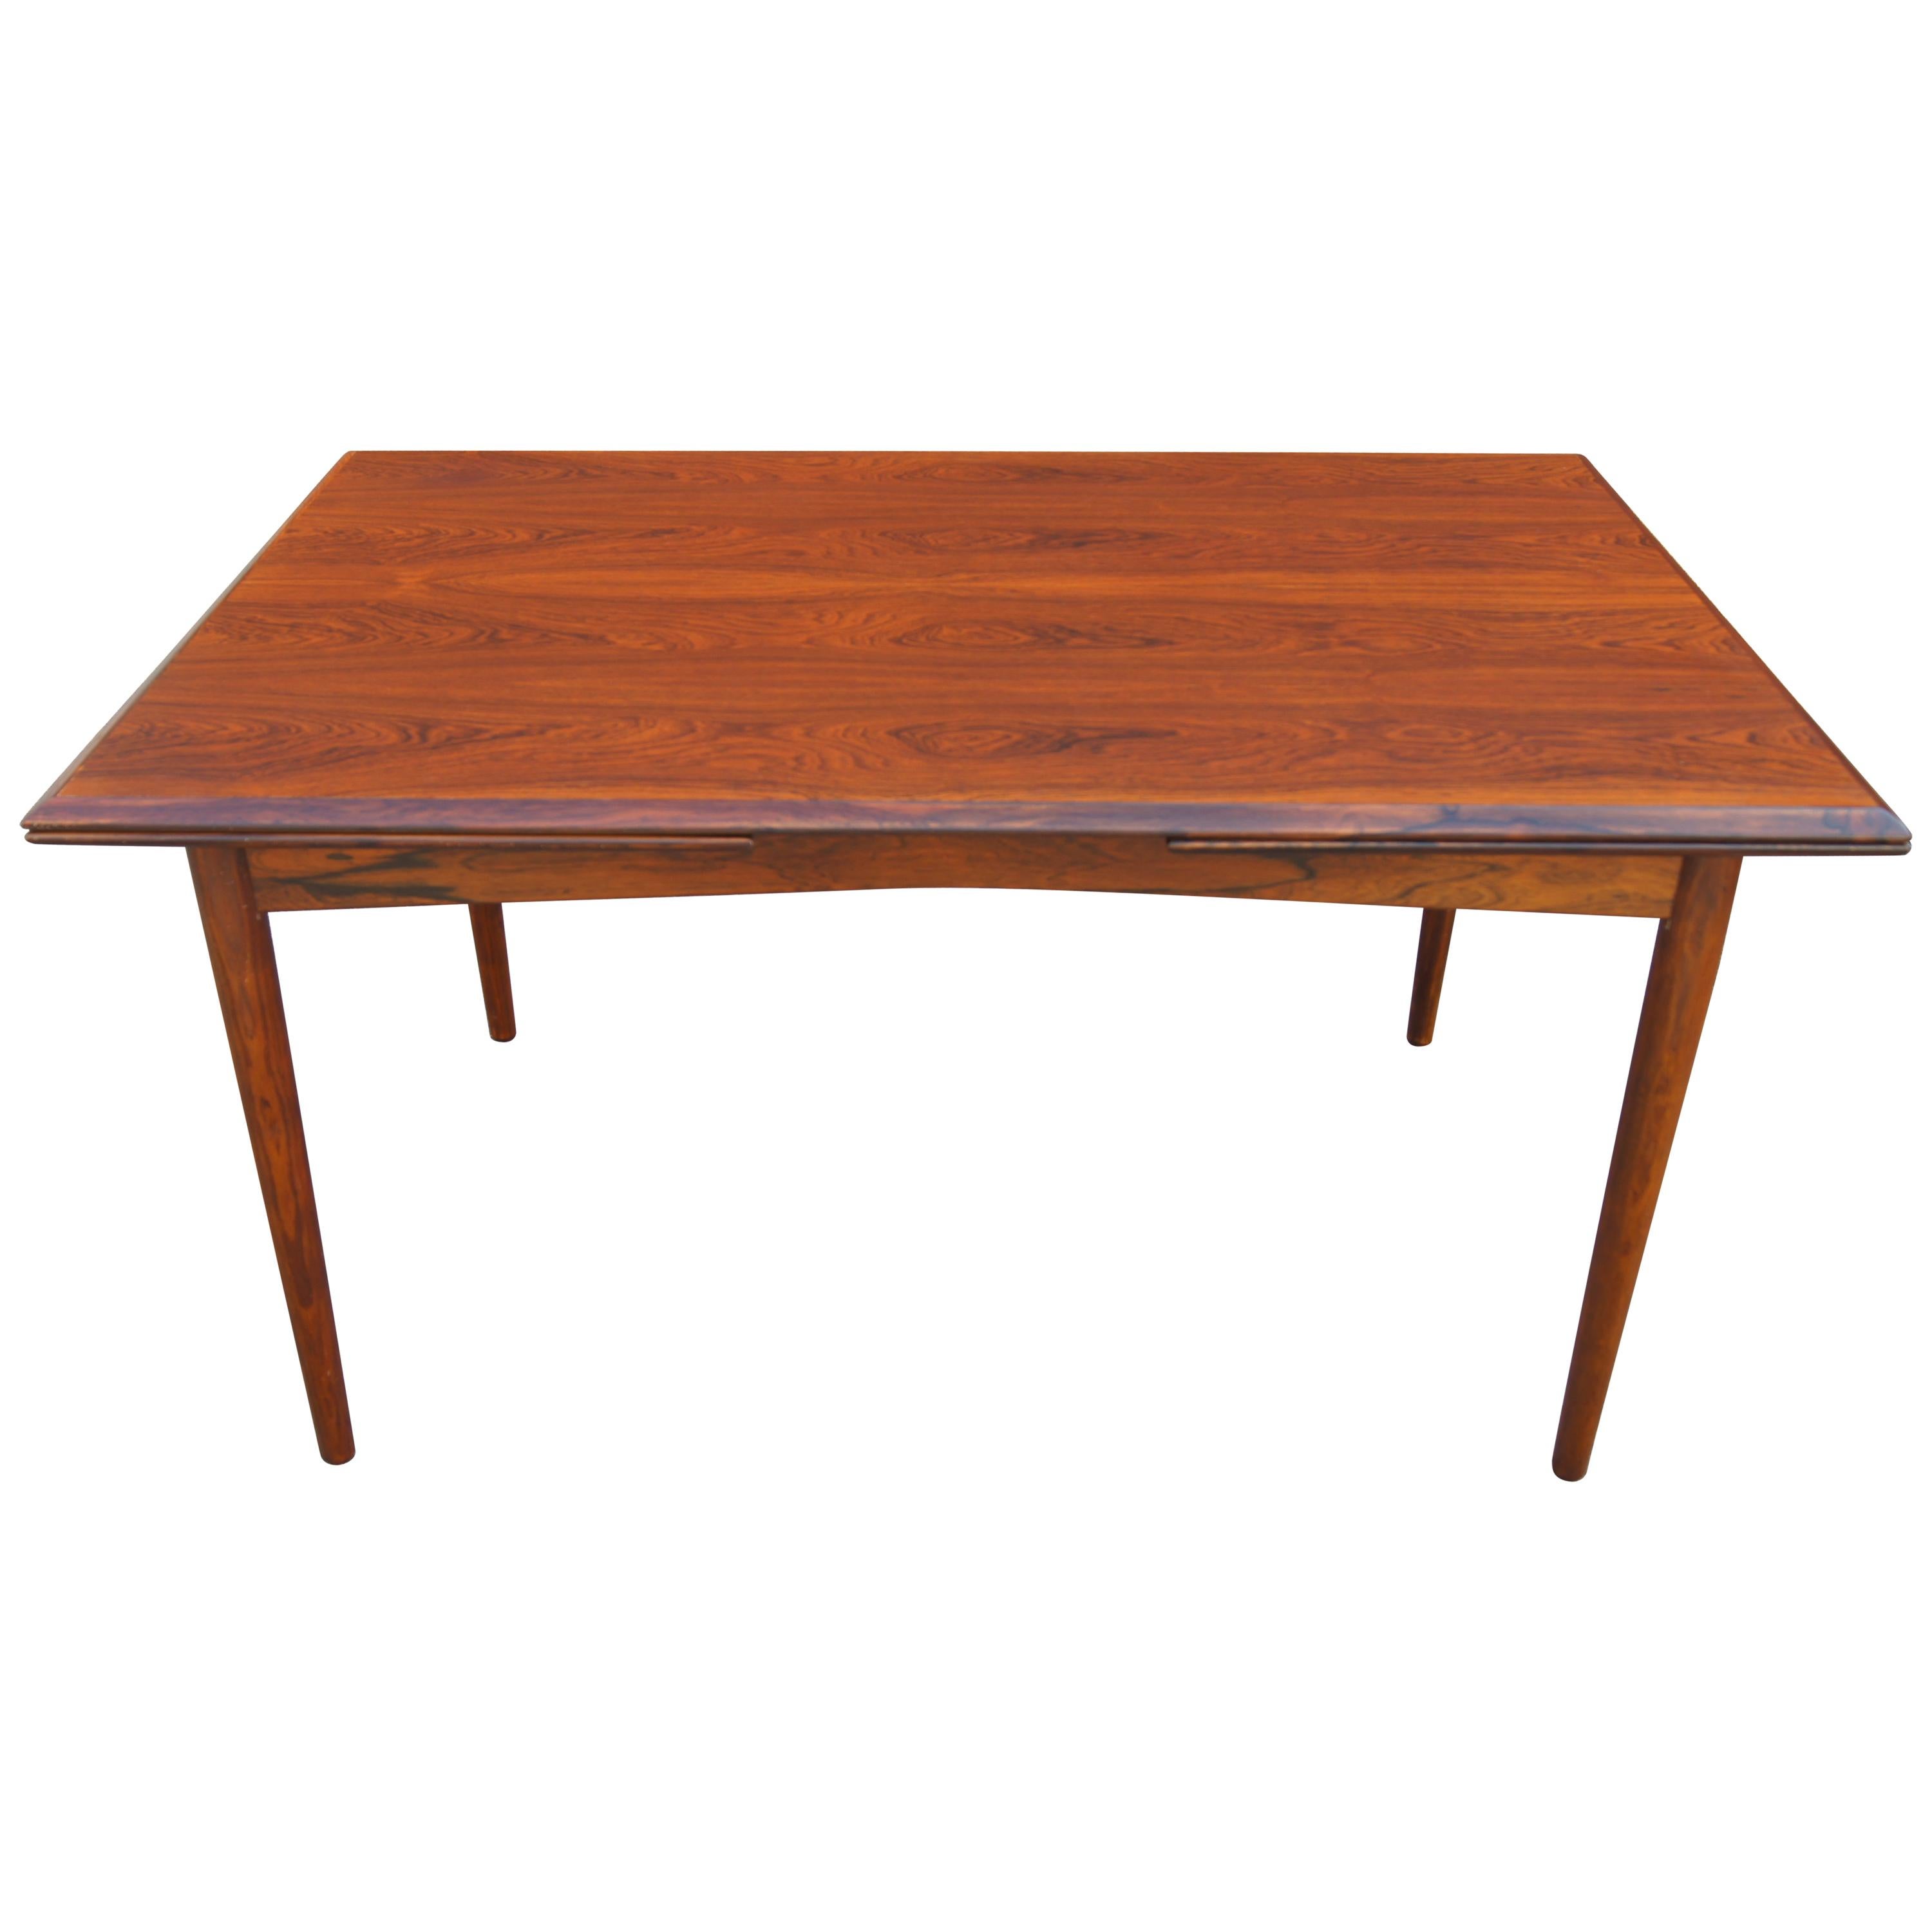 Danish Modern Rosewood Dining Table with Extensions